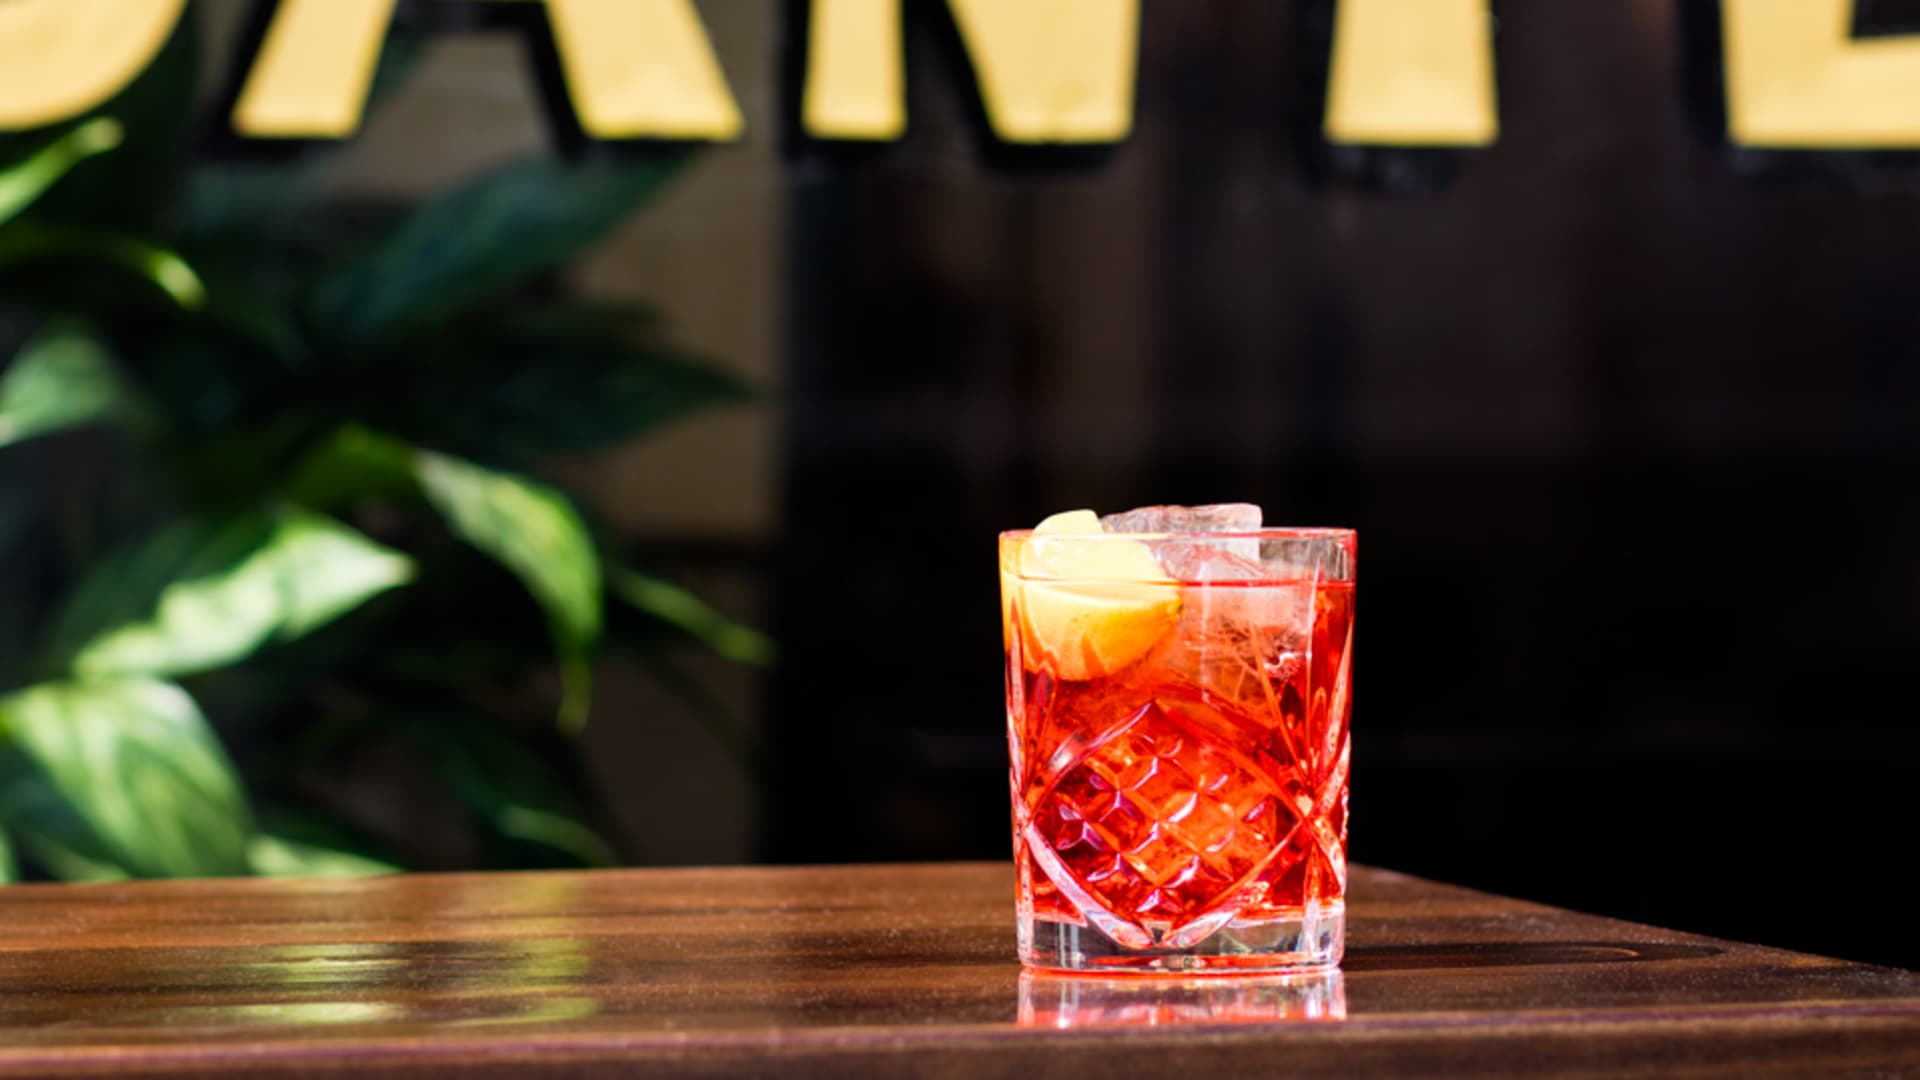 A negroni from Dante, a 106-year-old bar in New York City.